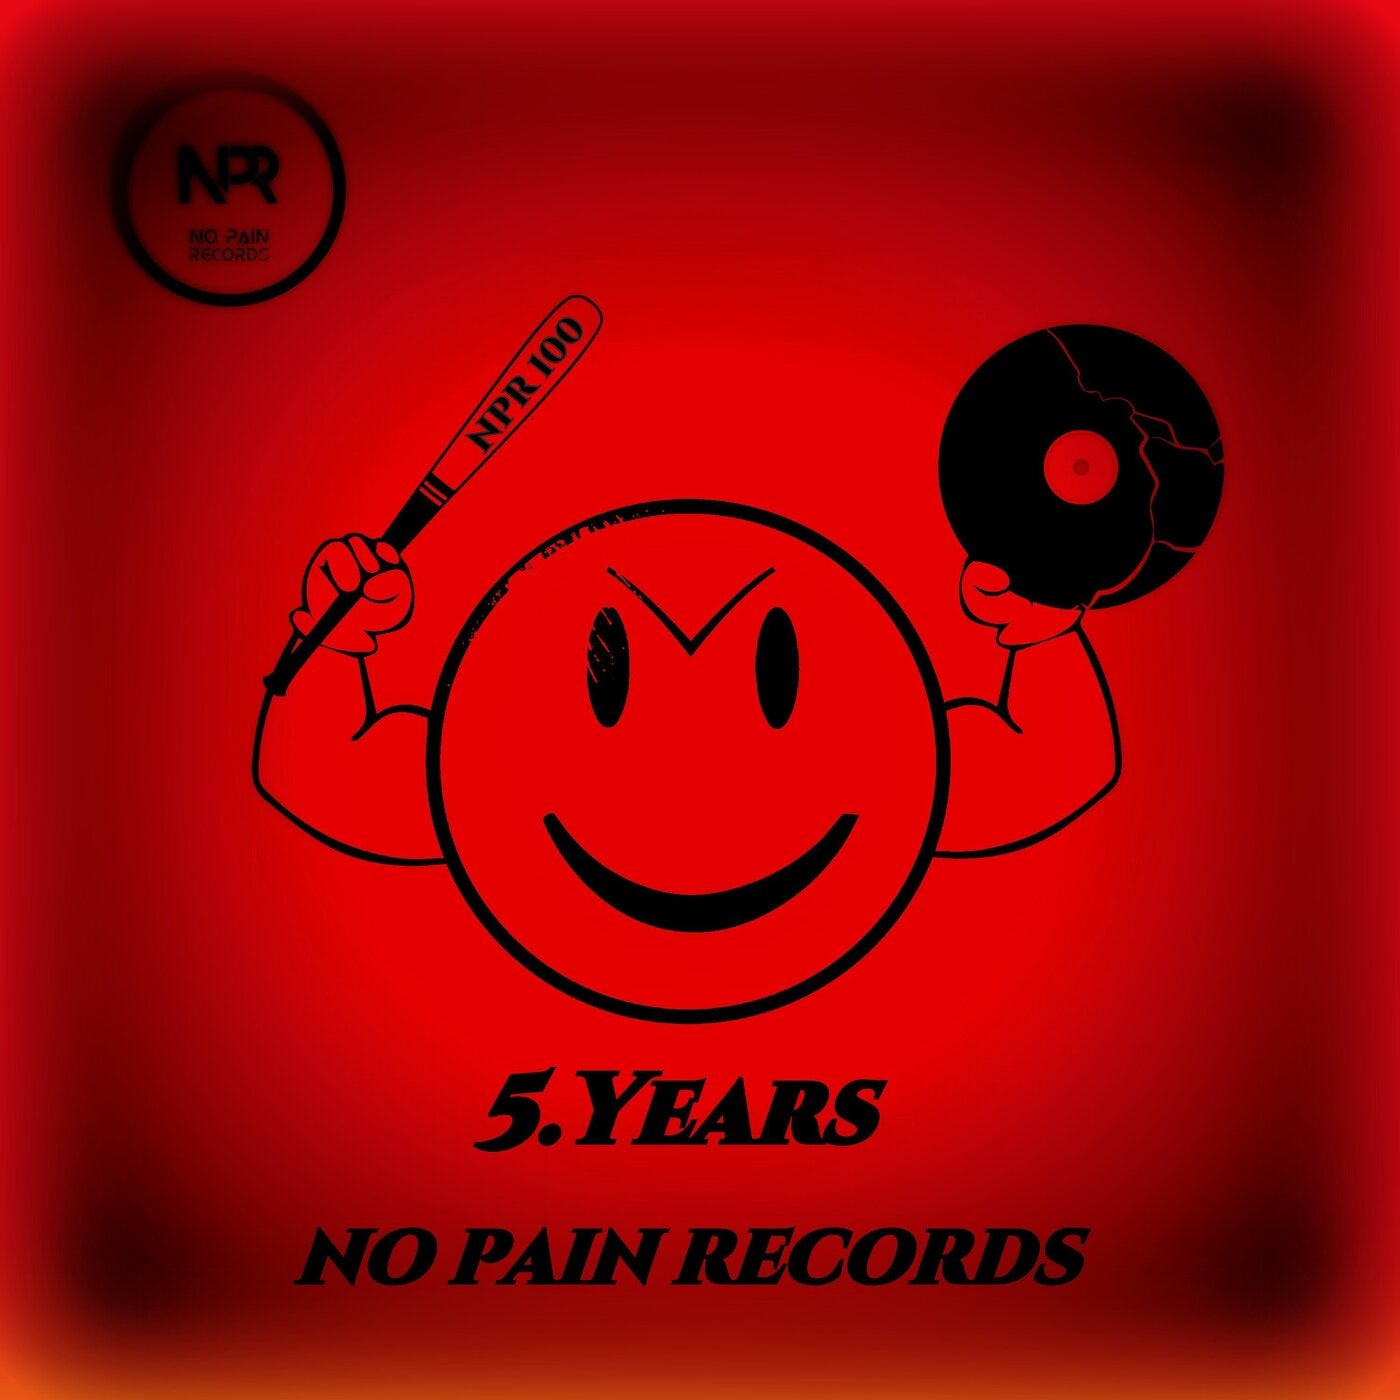 5.YEARS NO PAIN RECORDS